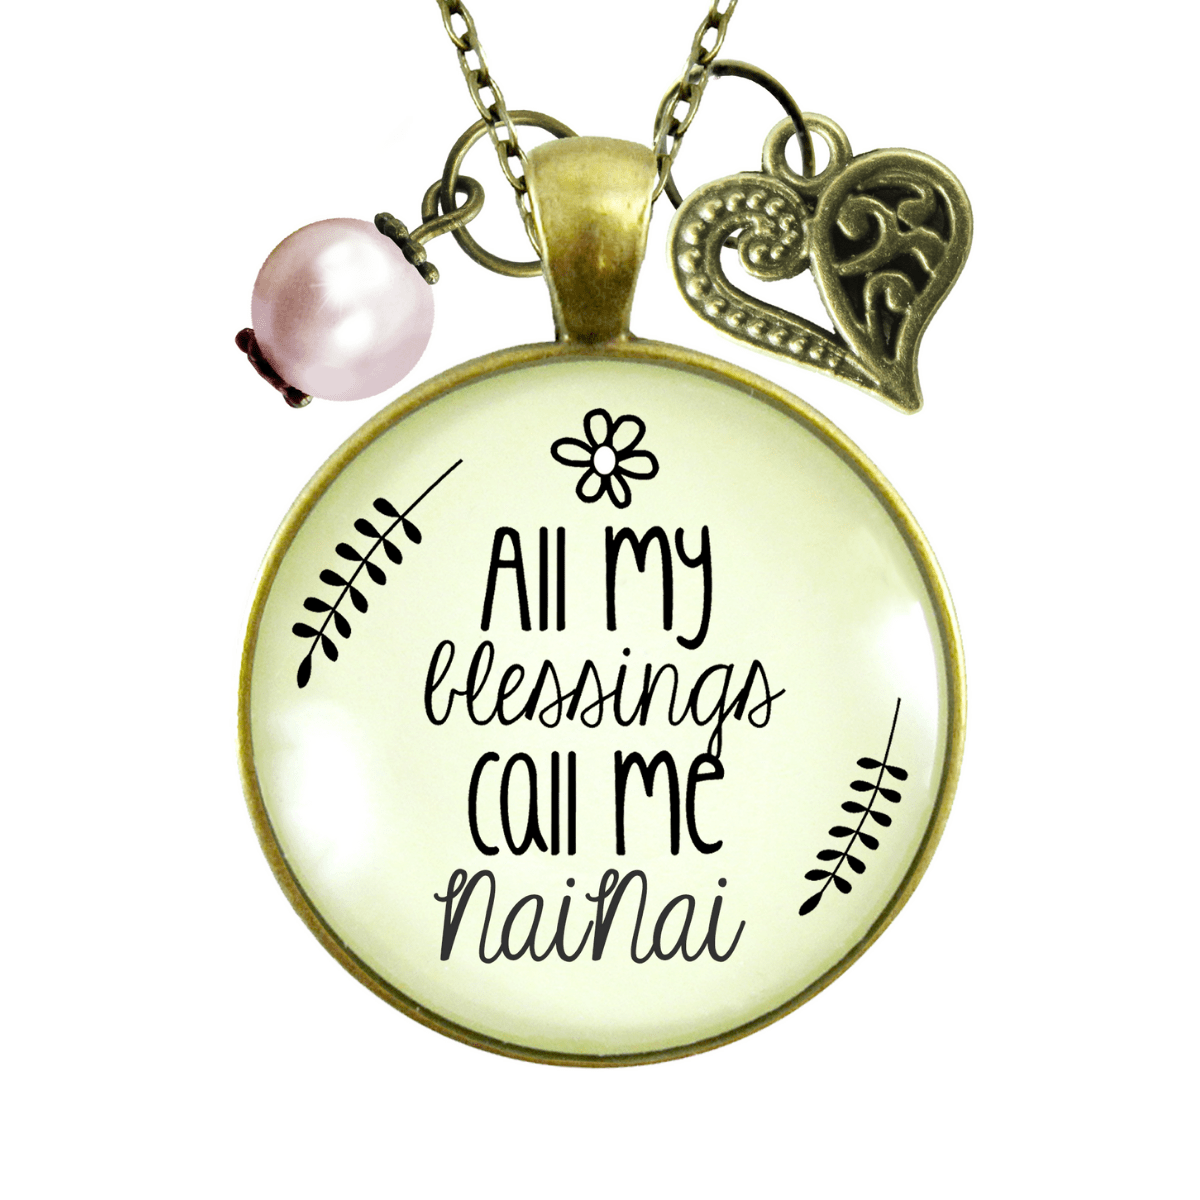 Gutsy Goodness NaiNai Necklace All My Blessings Chinese Grandma Womens Family Gift Jewelry - Gutsy Goodness Handmade Jewelry;Nainai Necklace All My Blessings Chinese Grandma Womens Family Gift Jewelry - Gutsy Goodness Handmade Jewelry Gifts